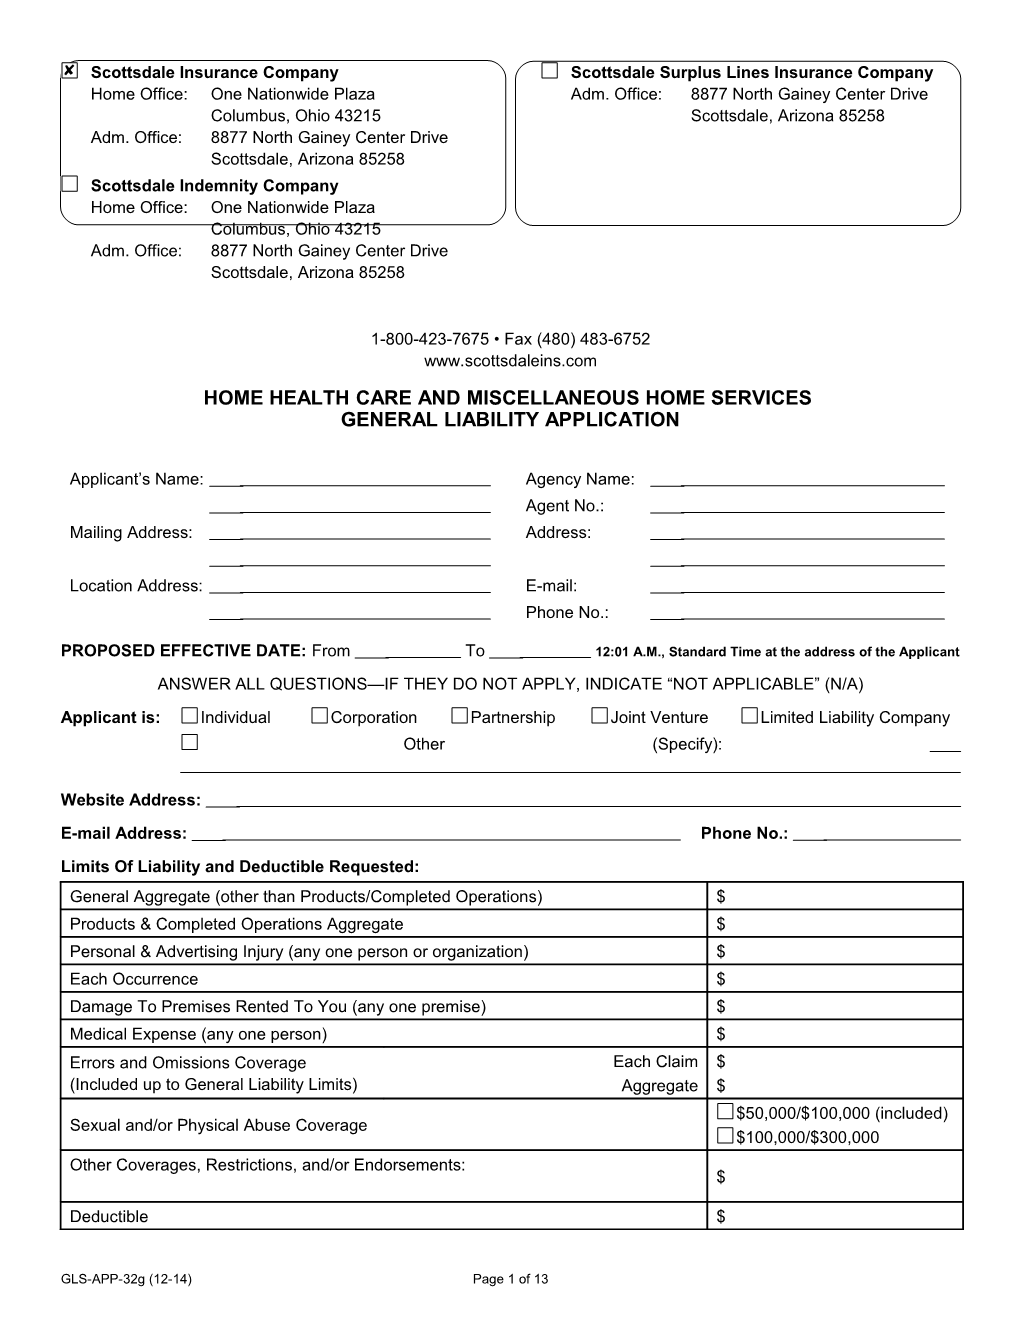 Home Health Care and Miscellaneous Home Services General Liability Application